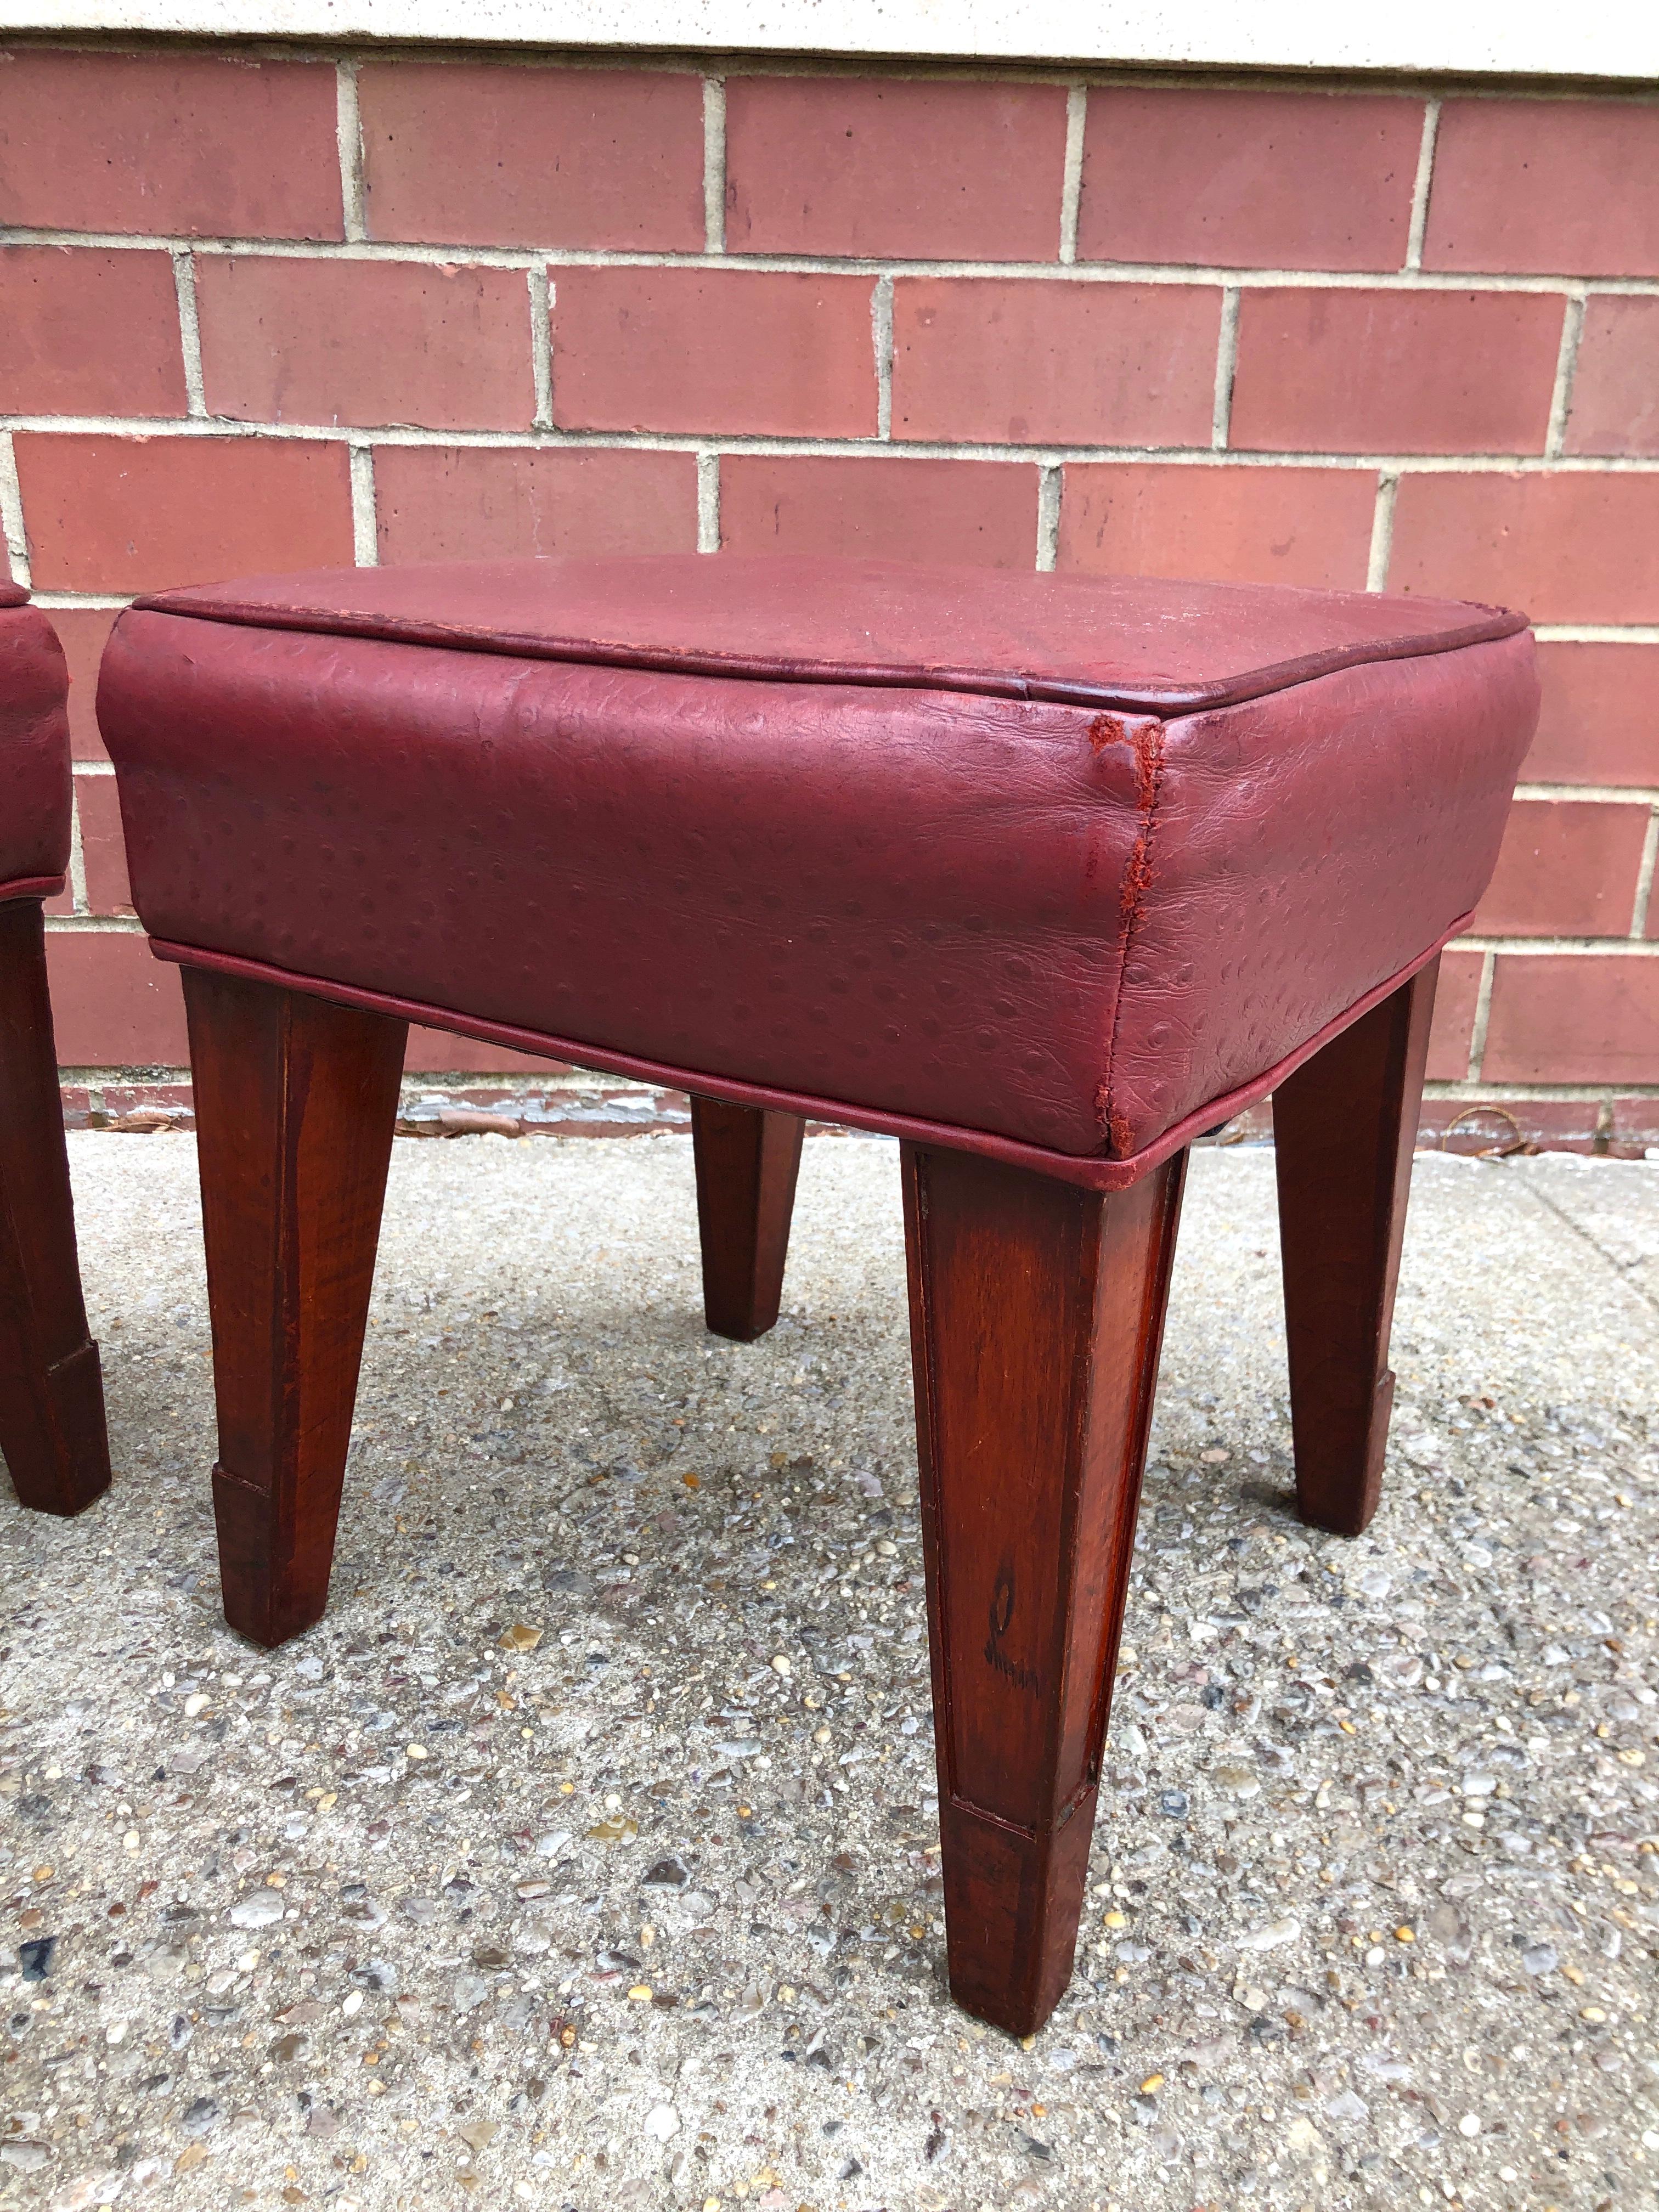 Pair of Philippe Starck Custom Stools from the Clift Hotel, San Francisco In Good Condition For Sale In Brooklyn, NY